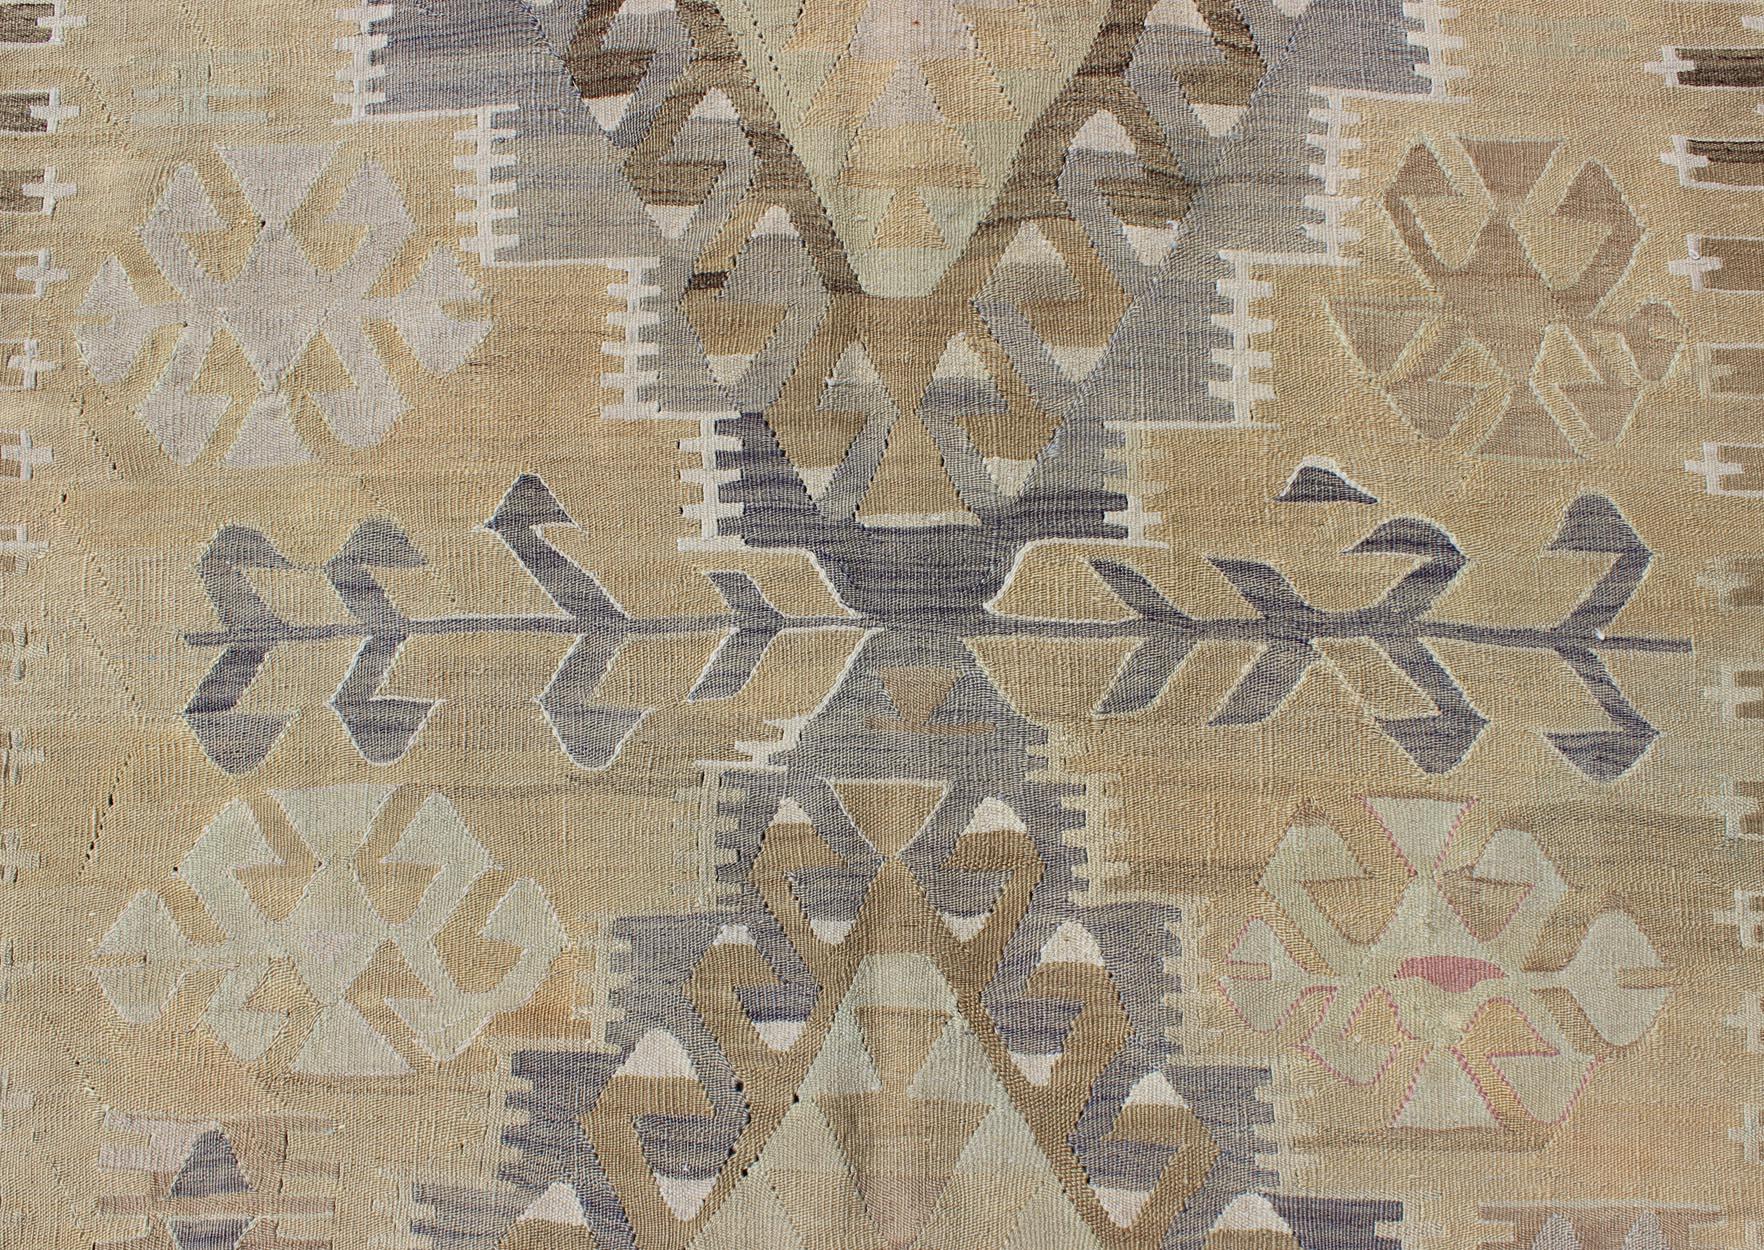 Wool Vintage Tribal Kilim with Geometric Design in Taupe, Honey, Lavender, Gray & Tan For Sale